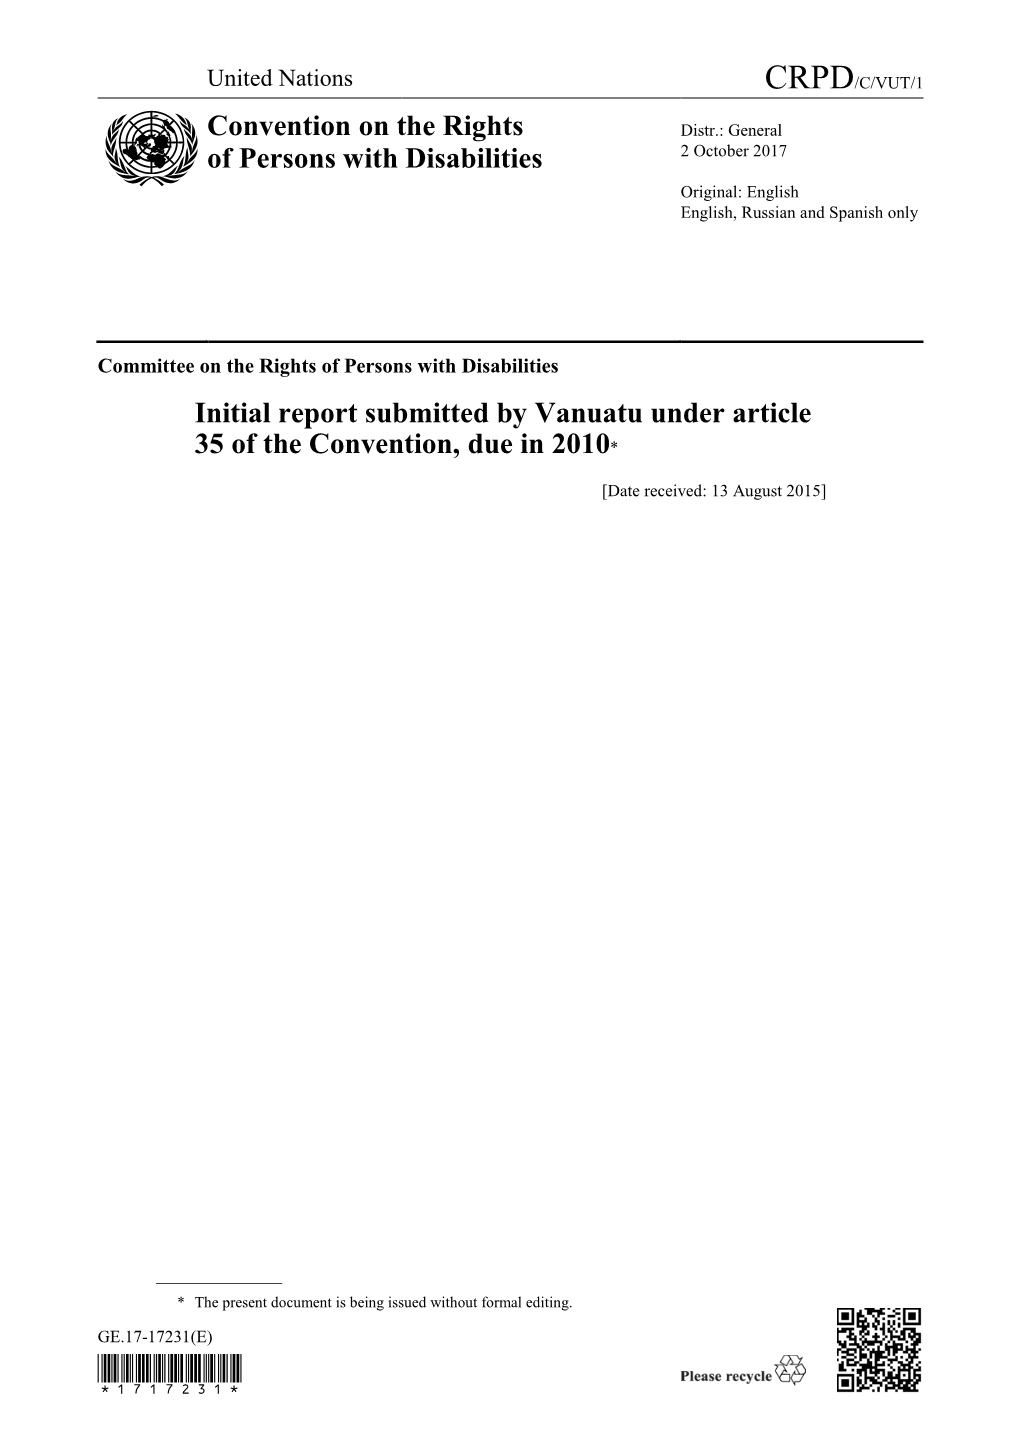 Initial Report Submitted by Vanuatu Under Article 35 of the Convention, Due in 2010*